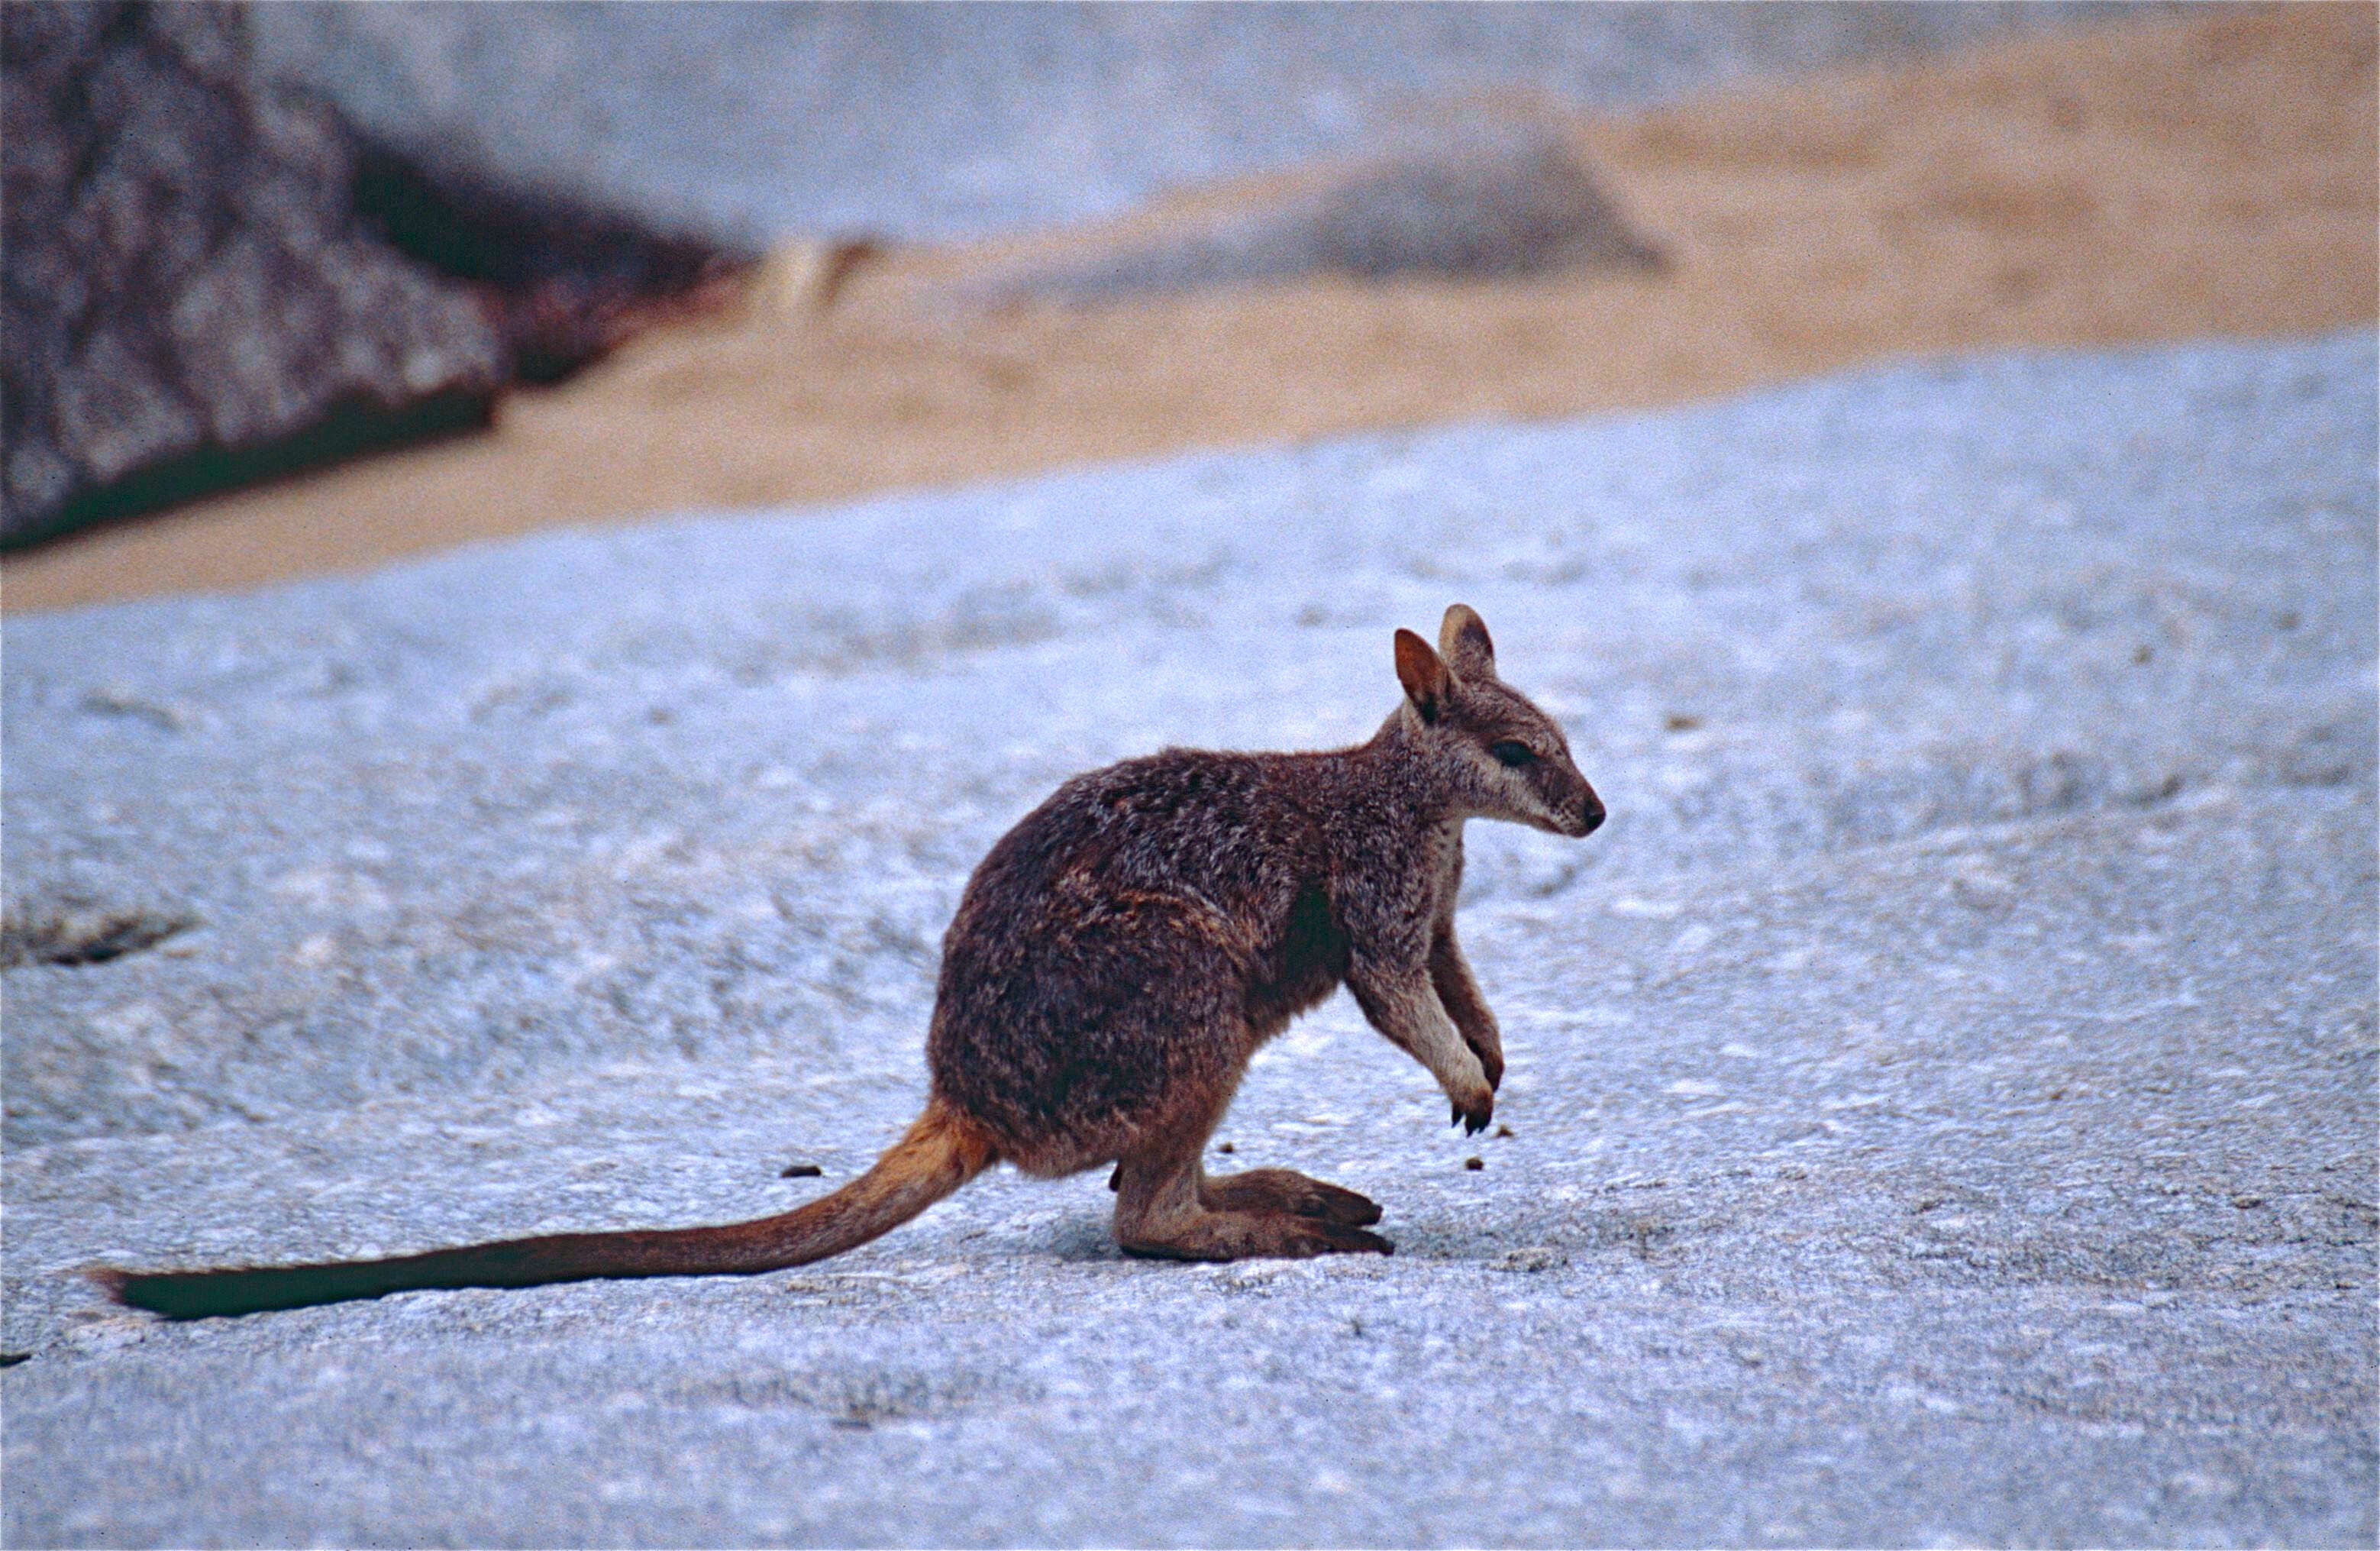 Image of Rock-wallaby